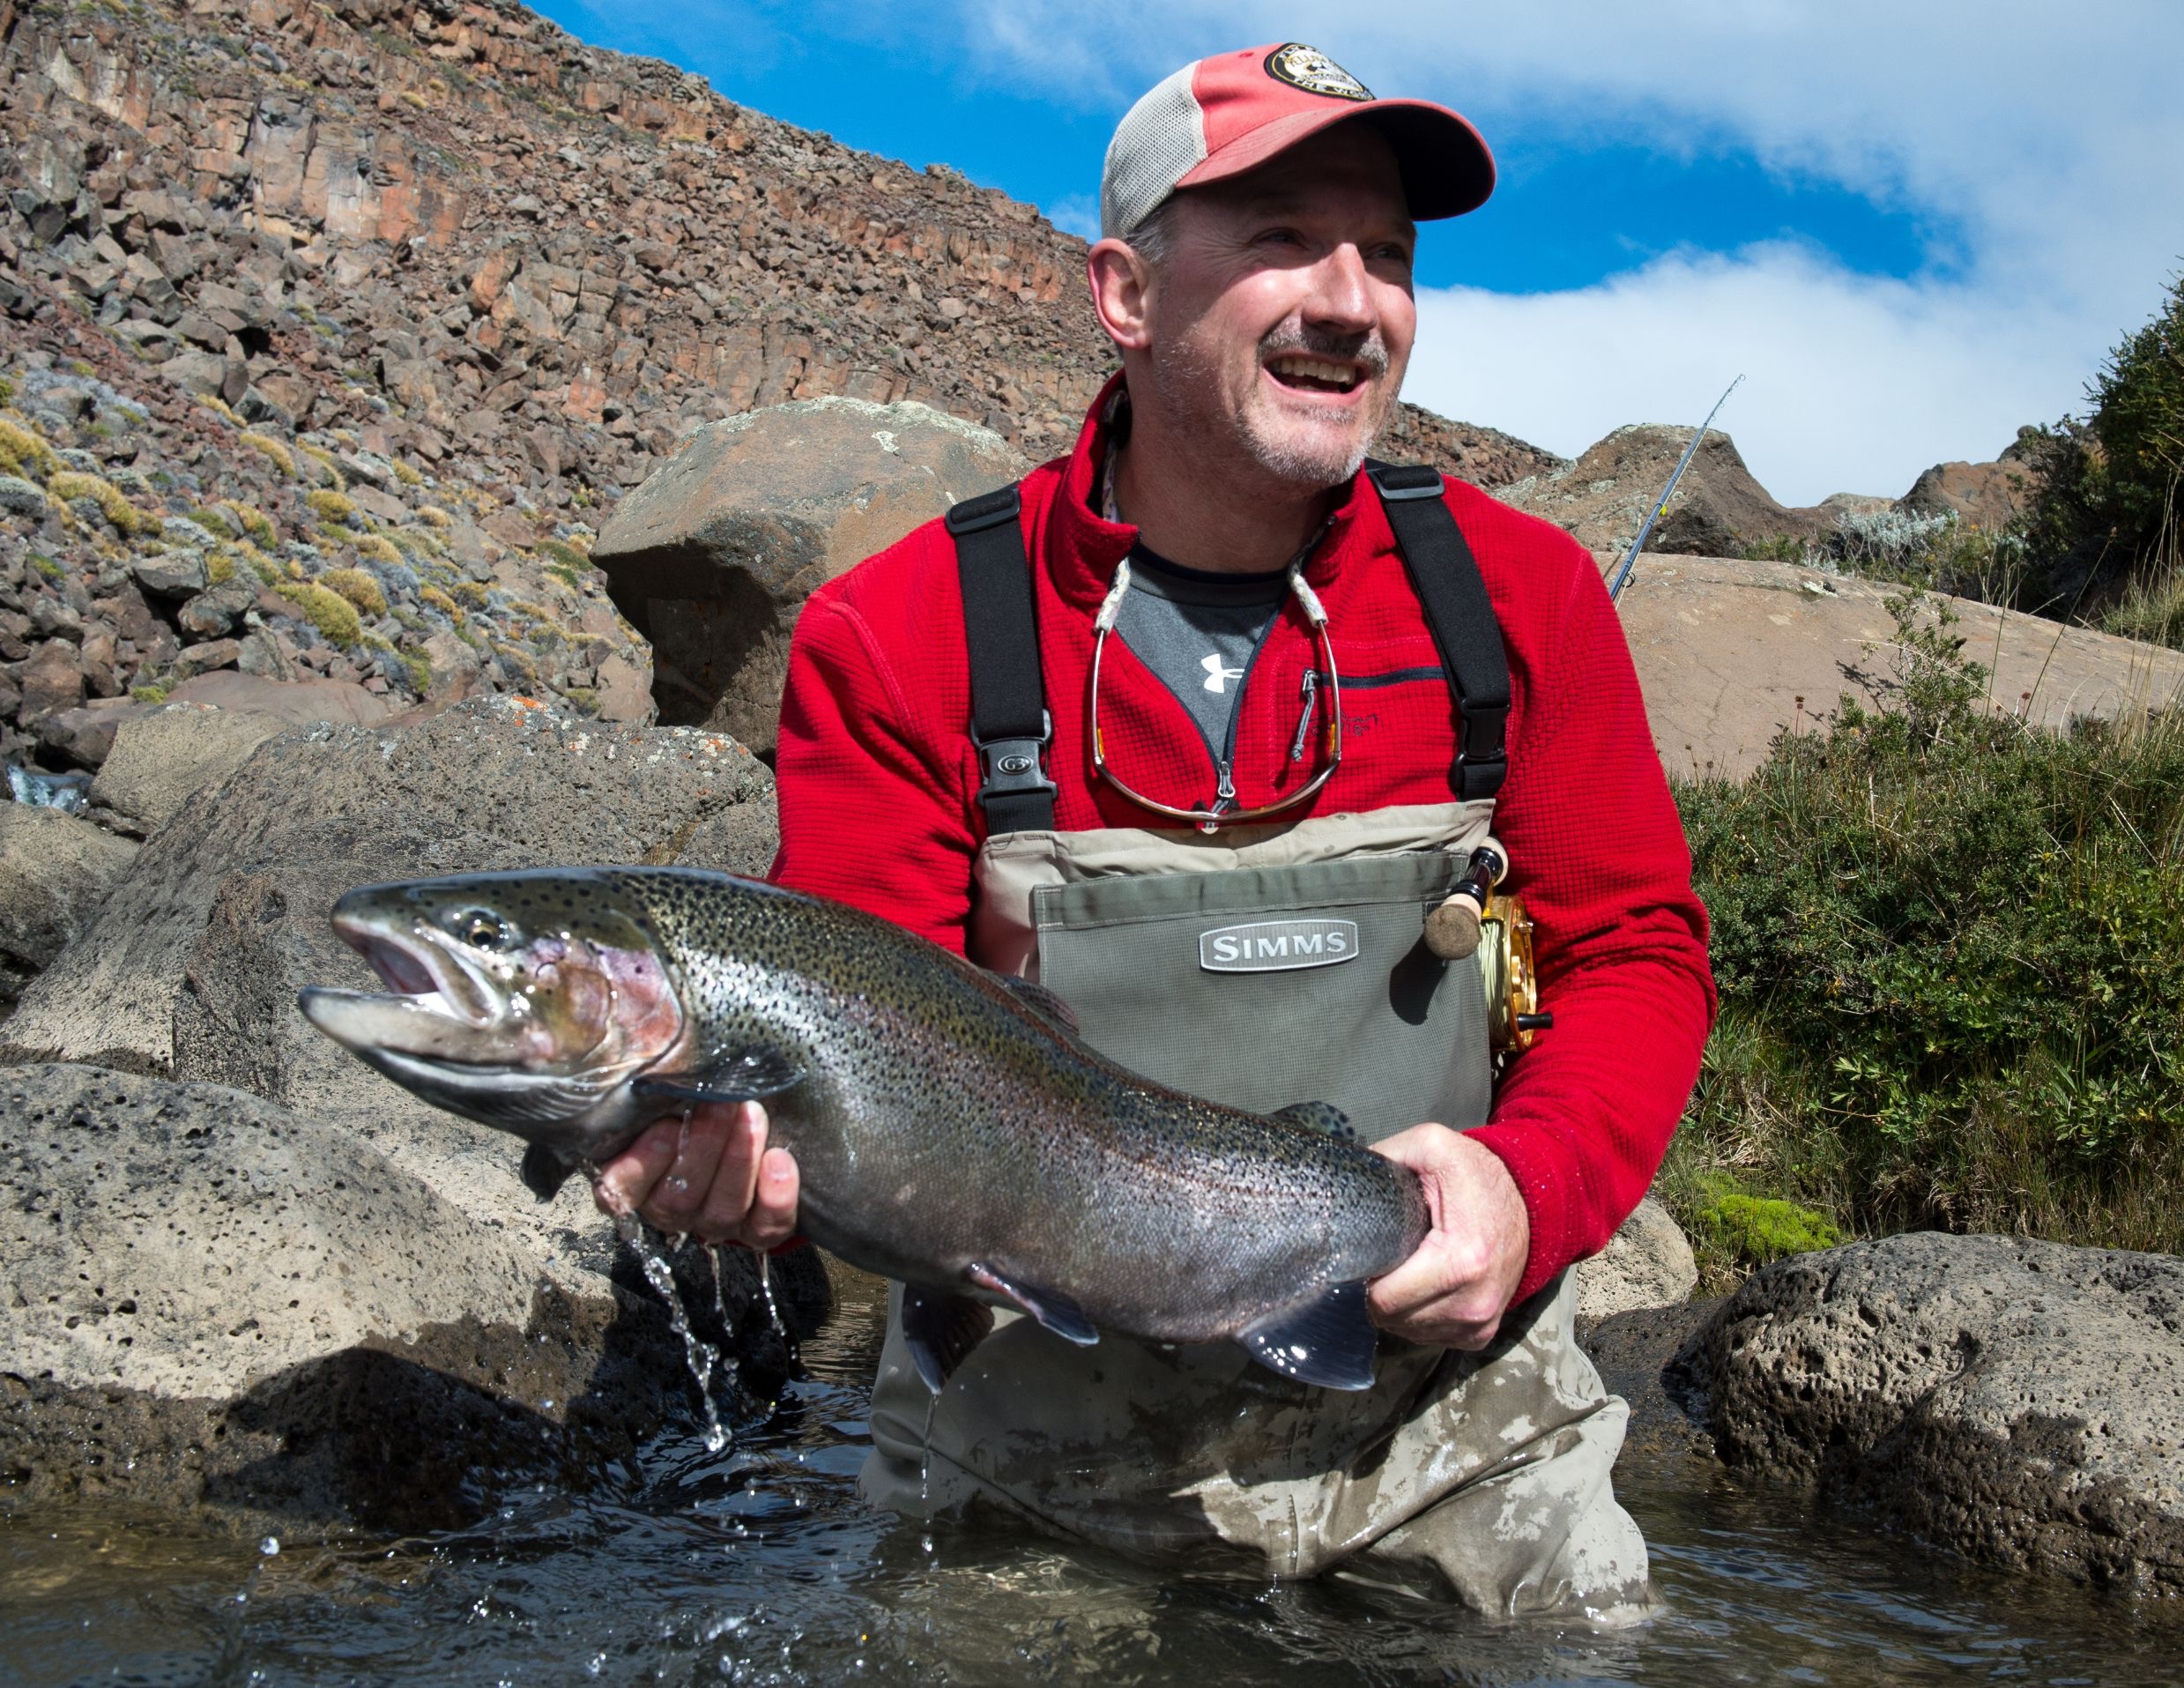 Outdoors International Podcast: Fly Fishing for Giant Rainbow Trout in  Argentina on Stobel Lake